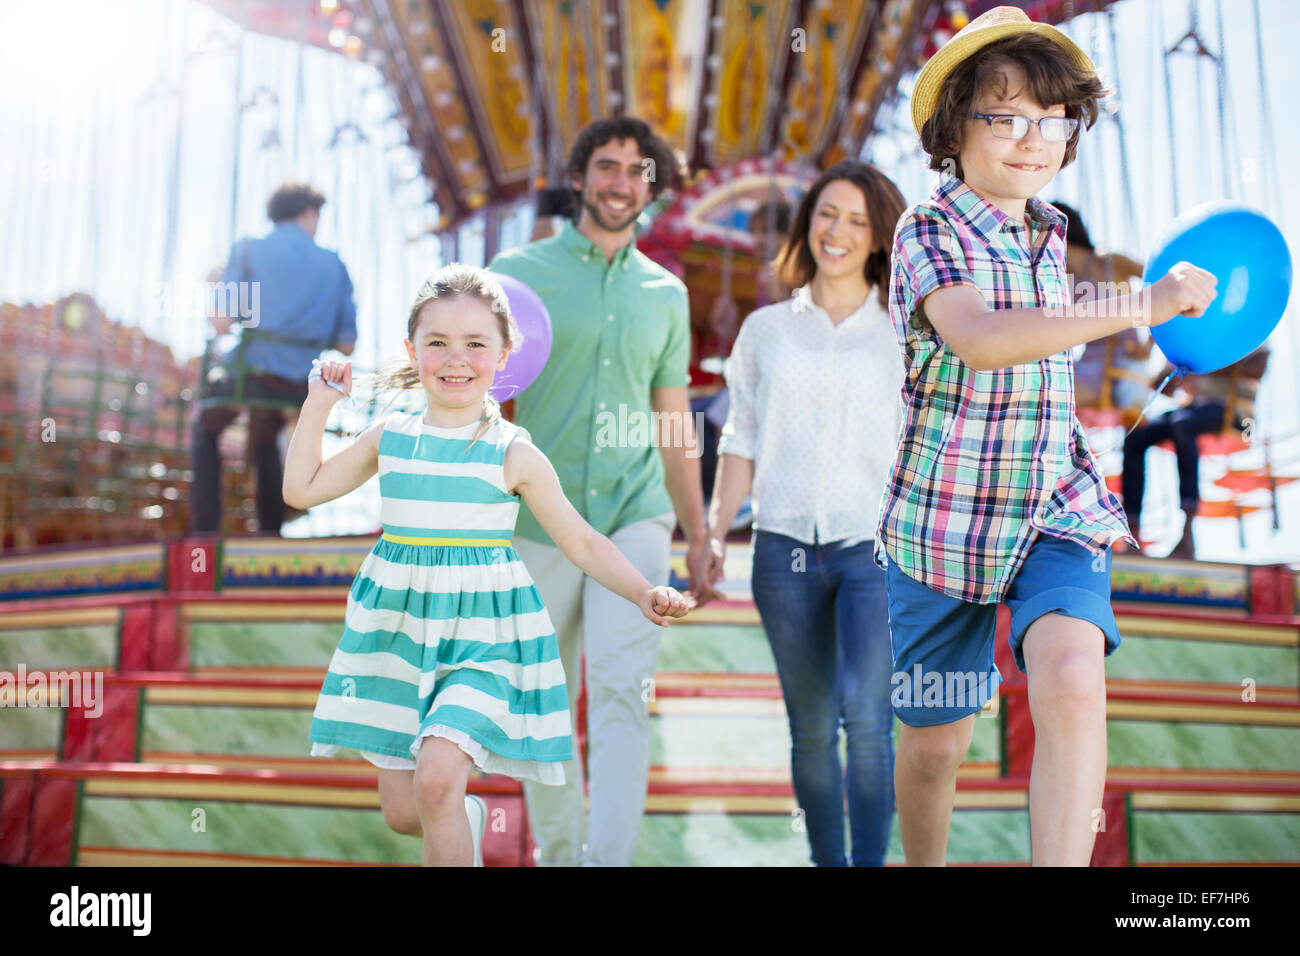 Children running in front of carousel, parents following them Stock Photo